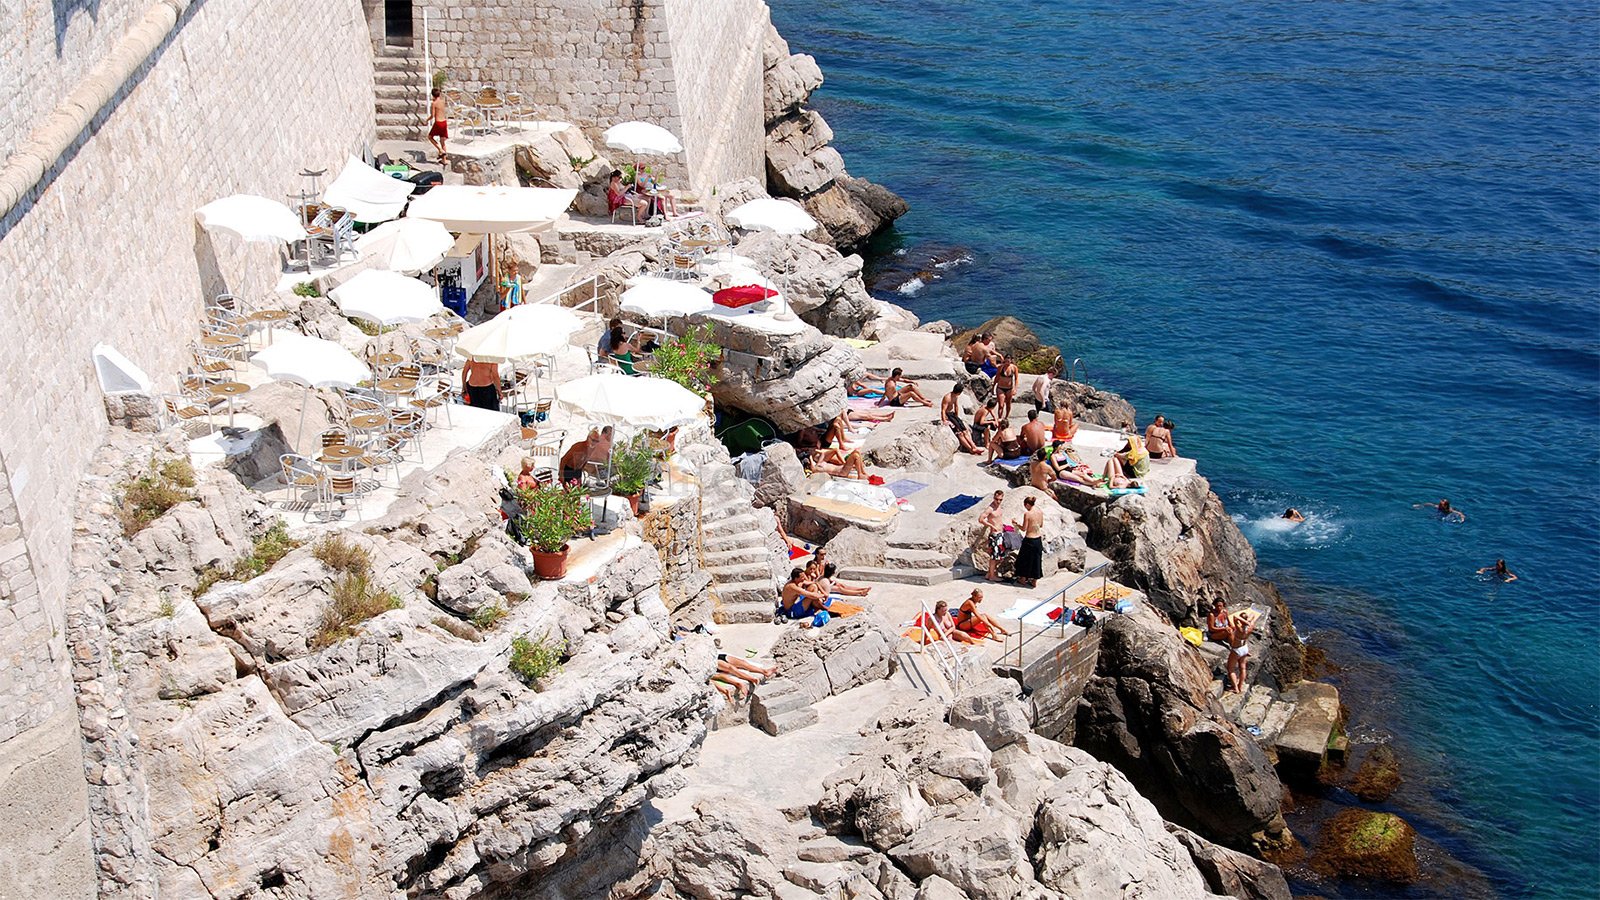 Butt you are naked in Dubrovnik - The Dubrovnik Times